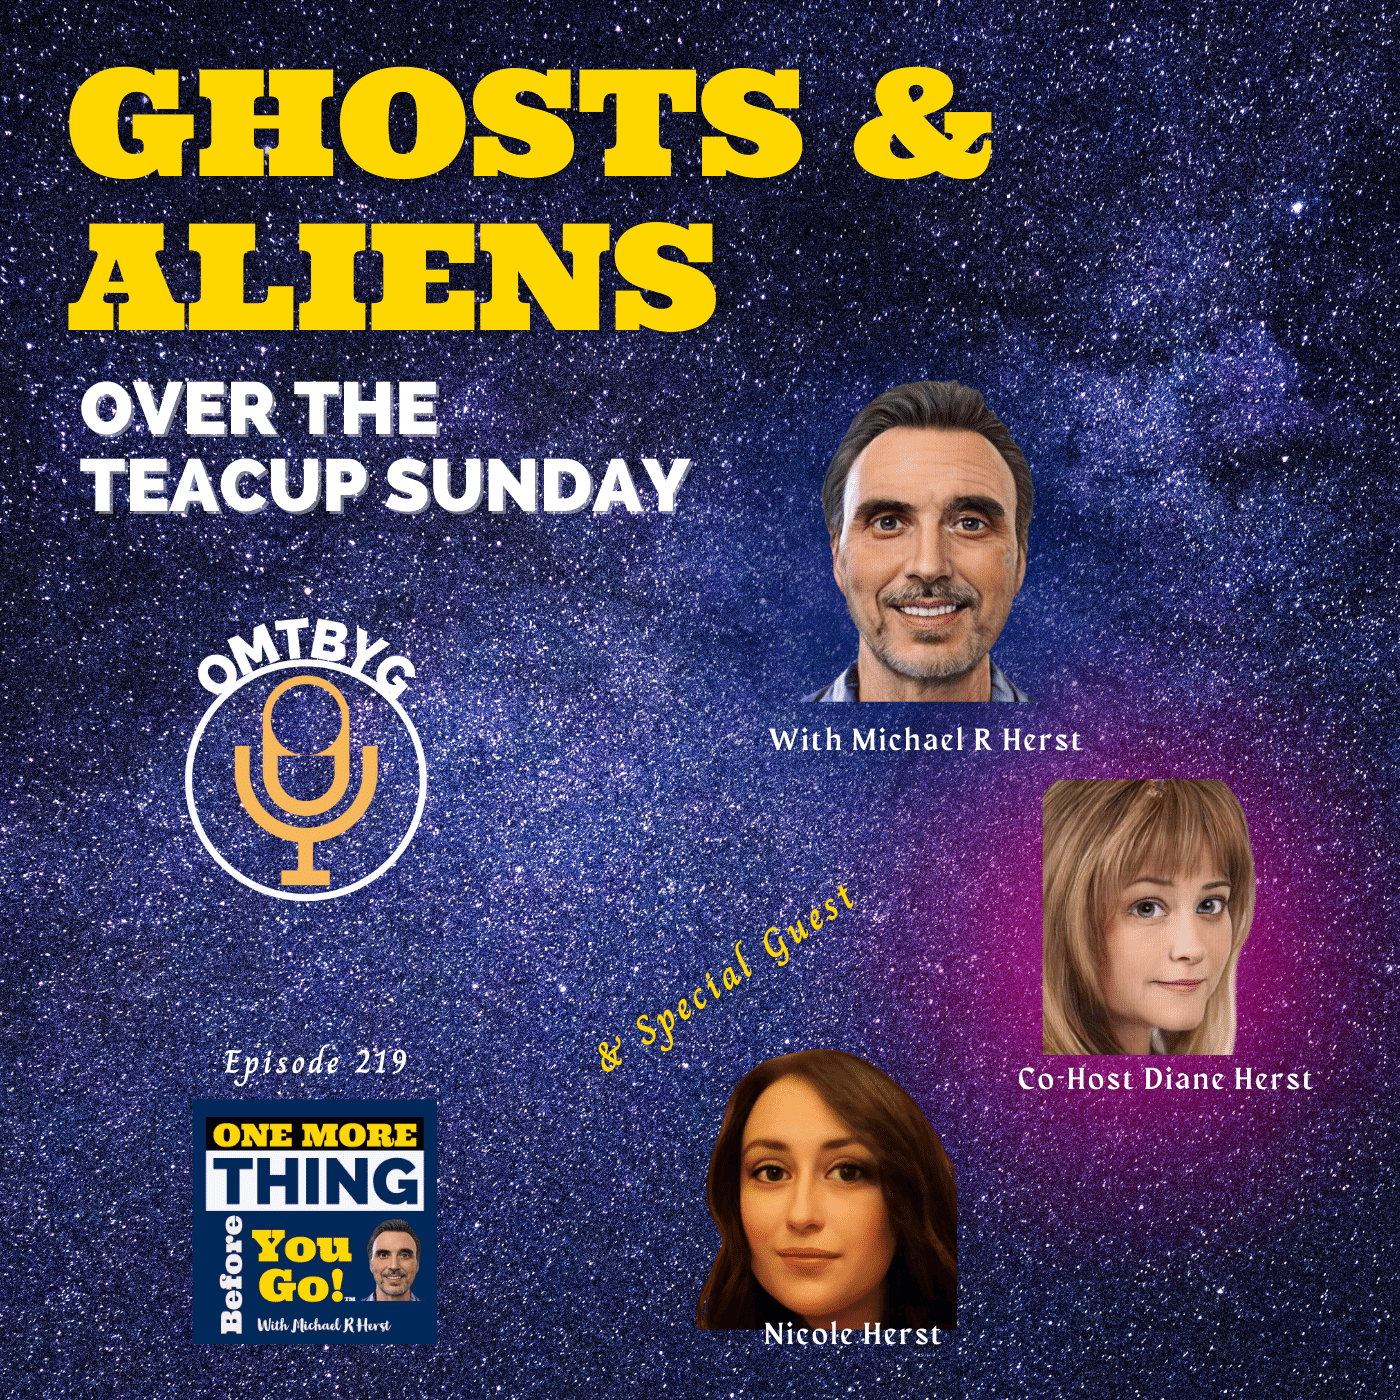 Ghosts & Aliens - Over the Teacup Sunday